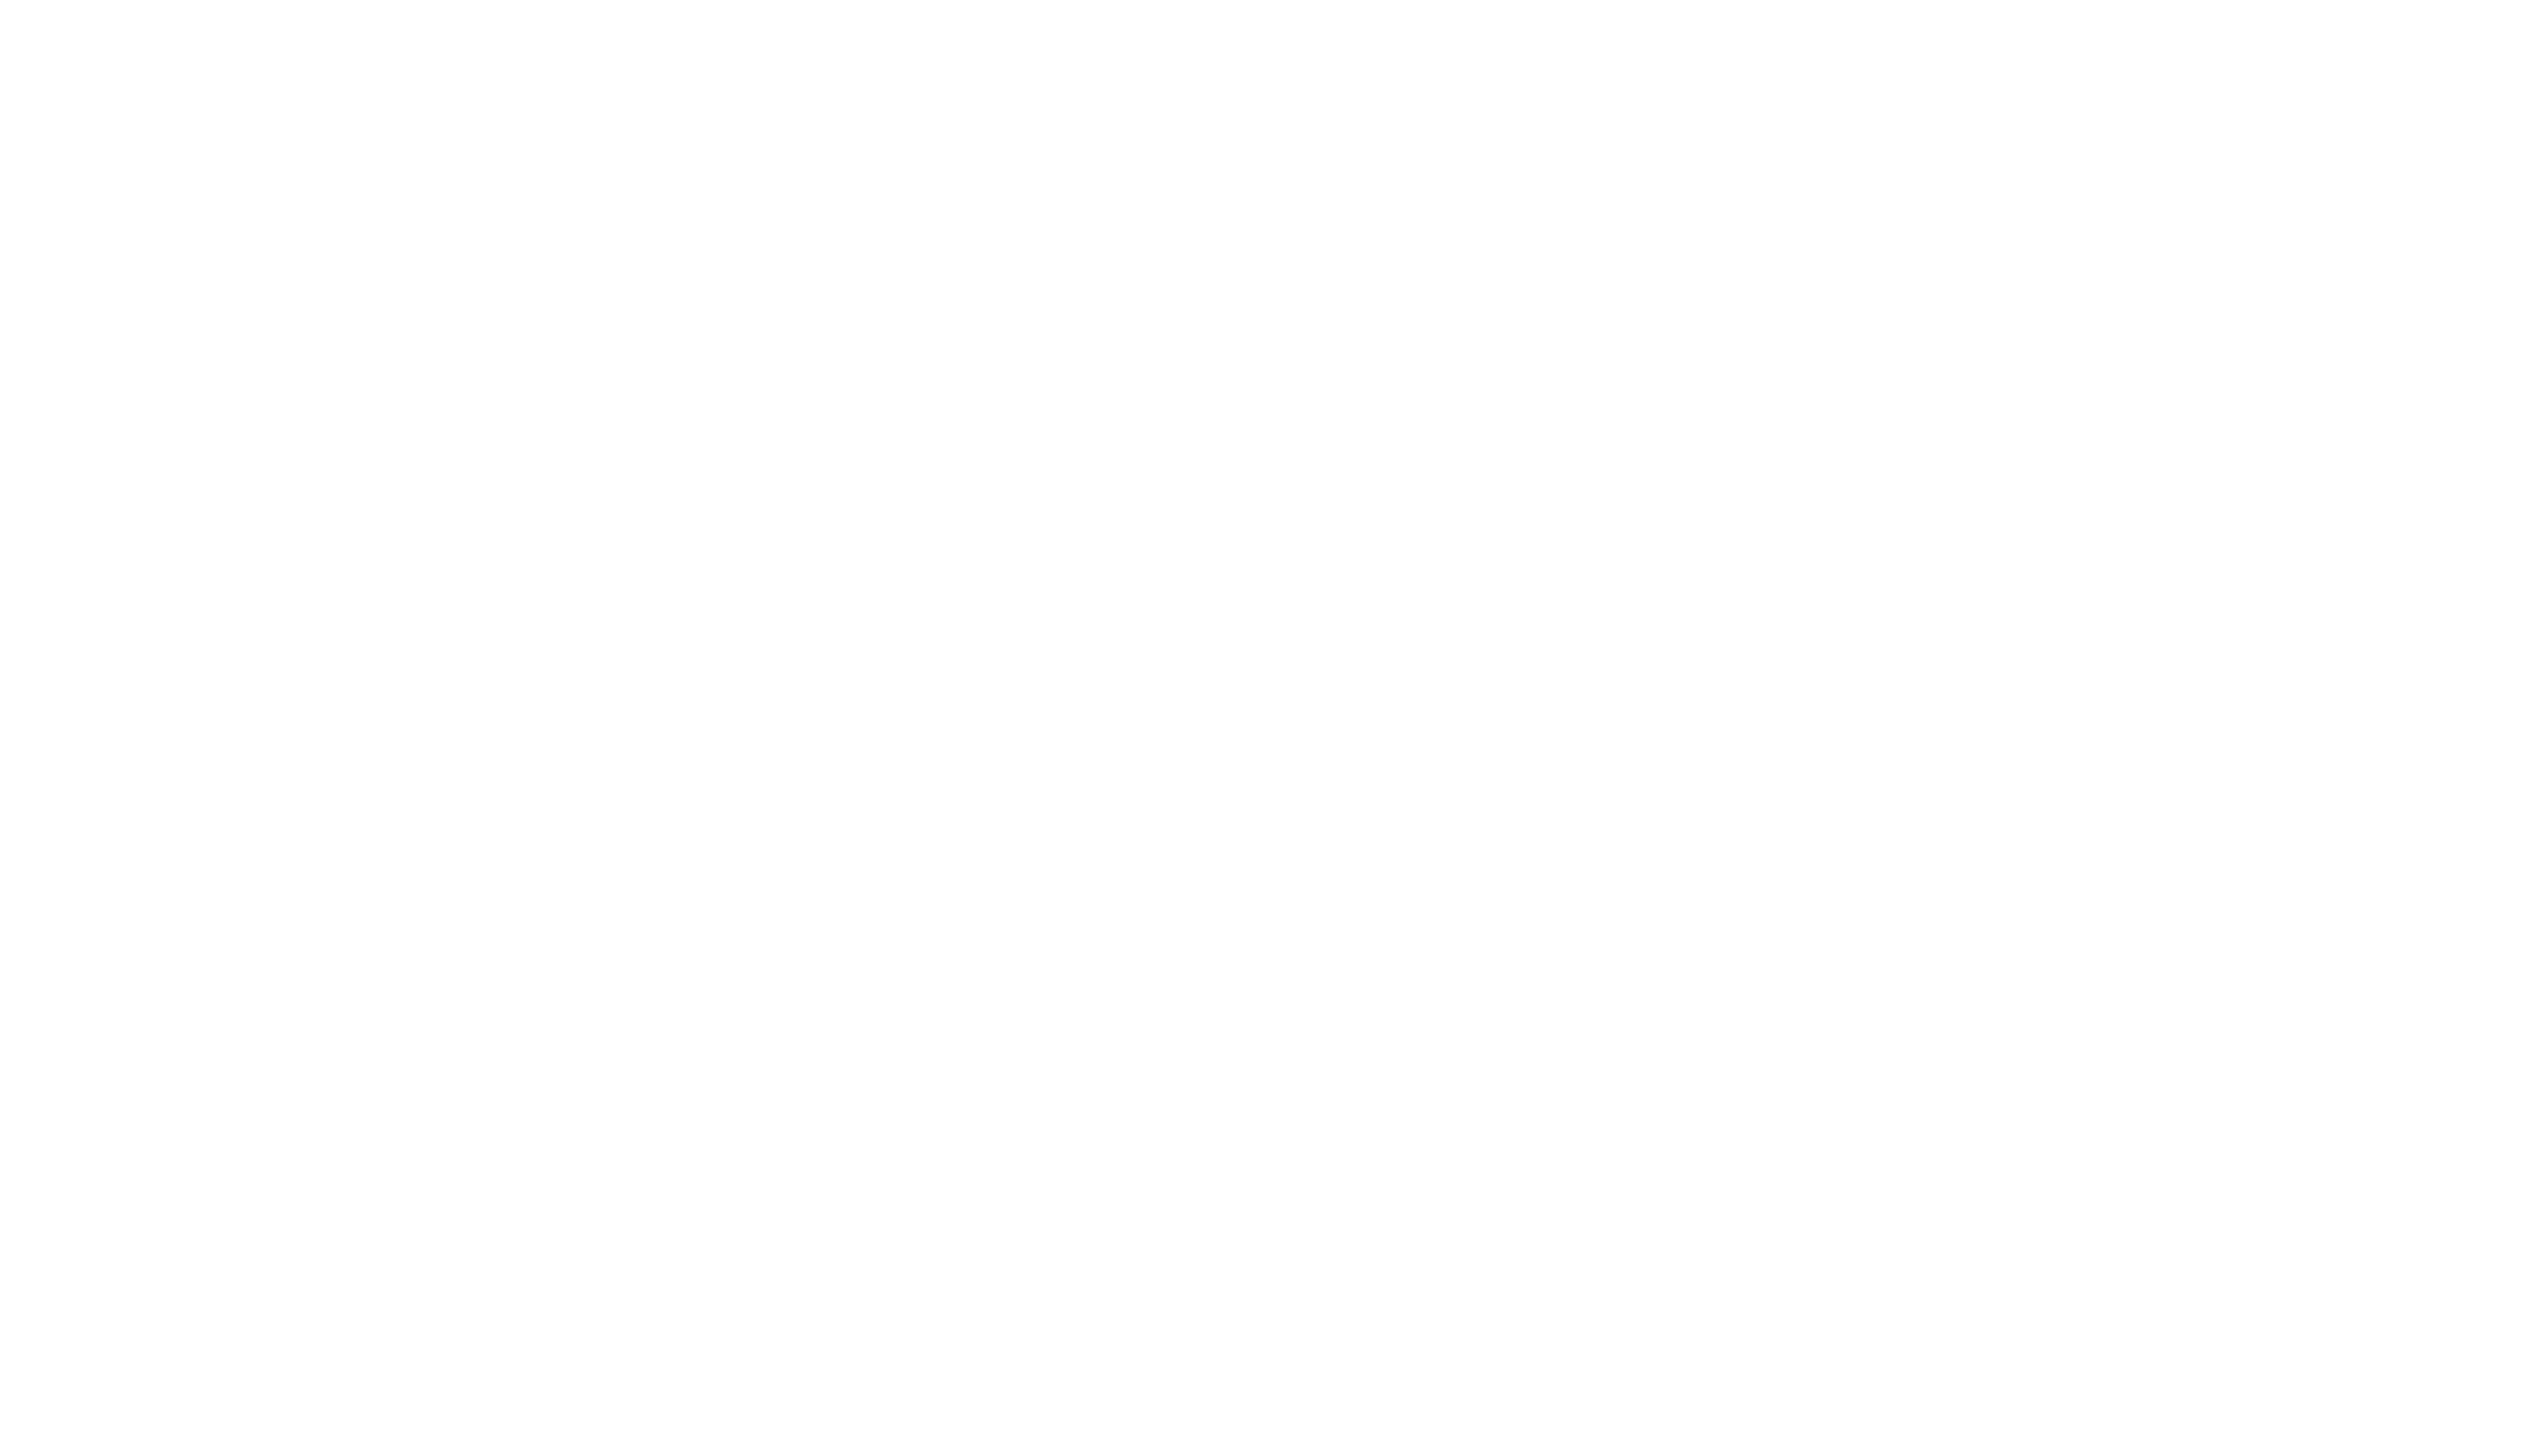 A.T.Z. Marketing Solutions GmbH